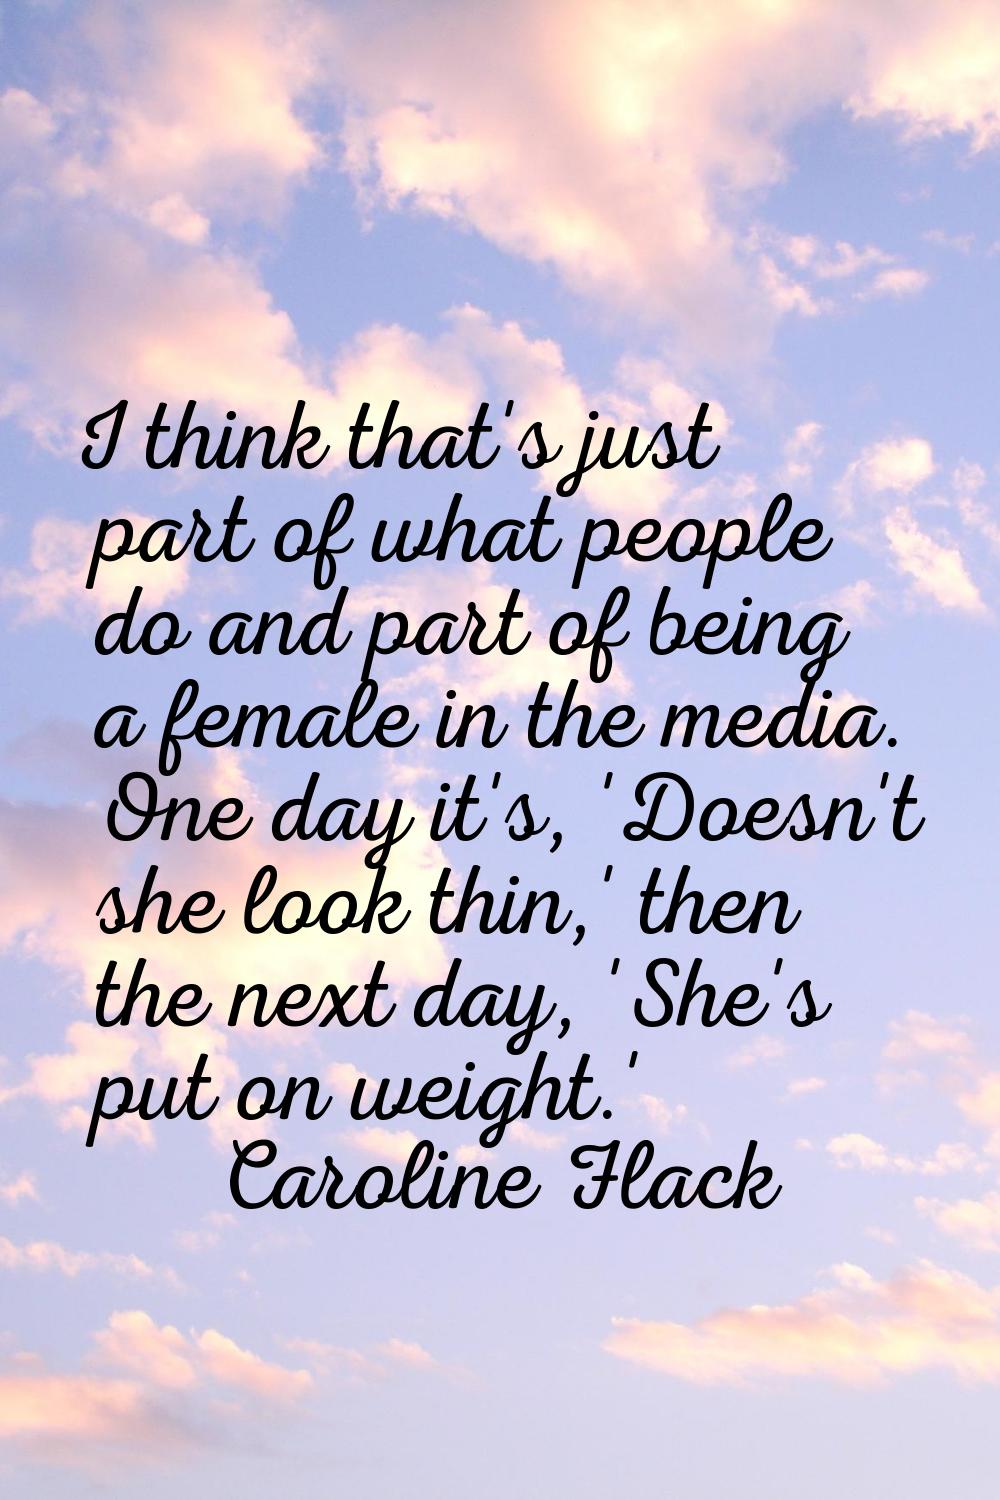 I think that's just part of what people do and part of being a female in the media. One day it's, '